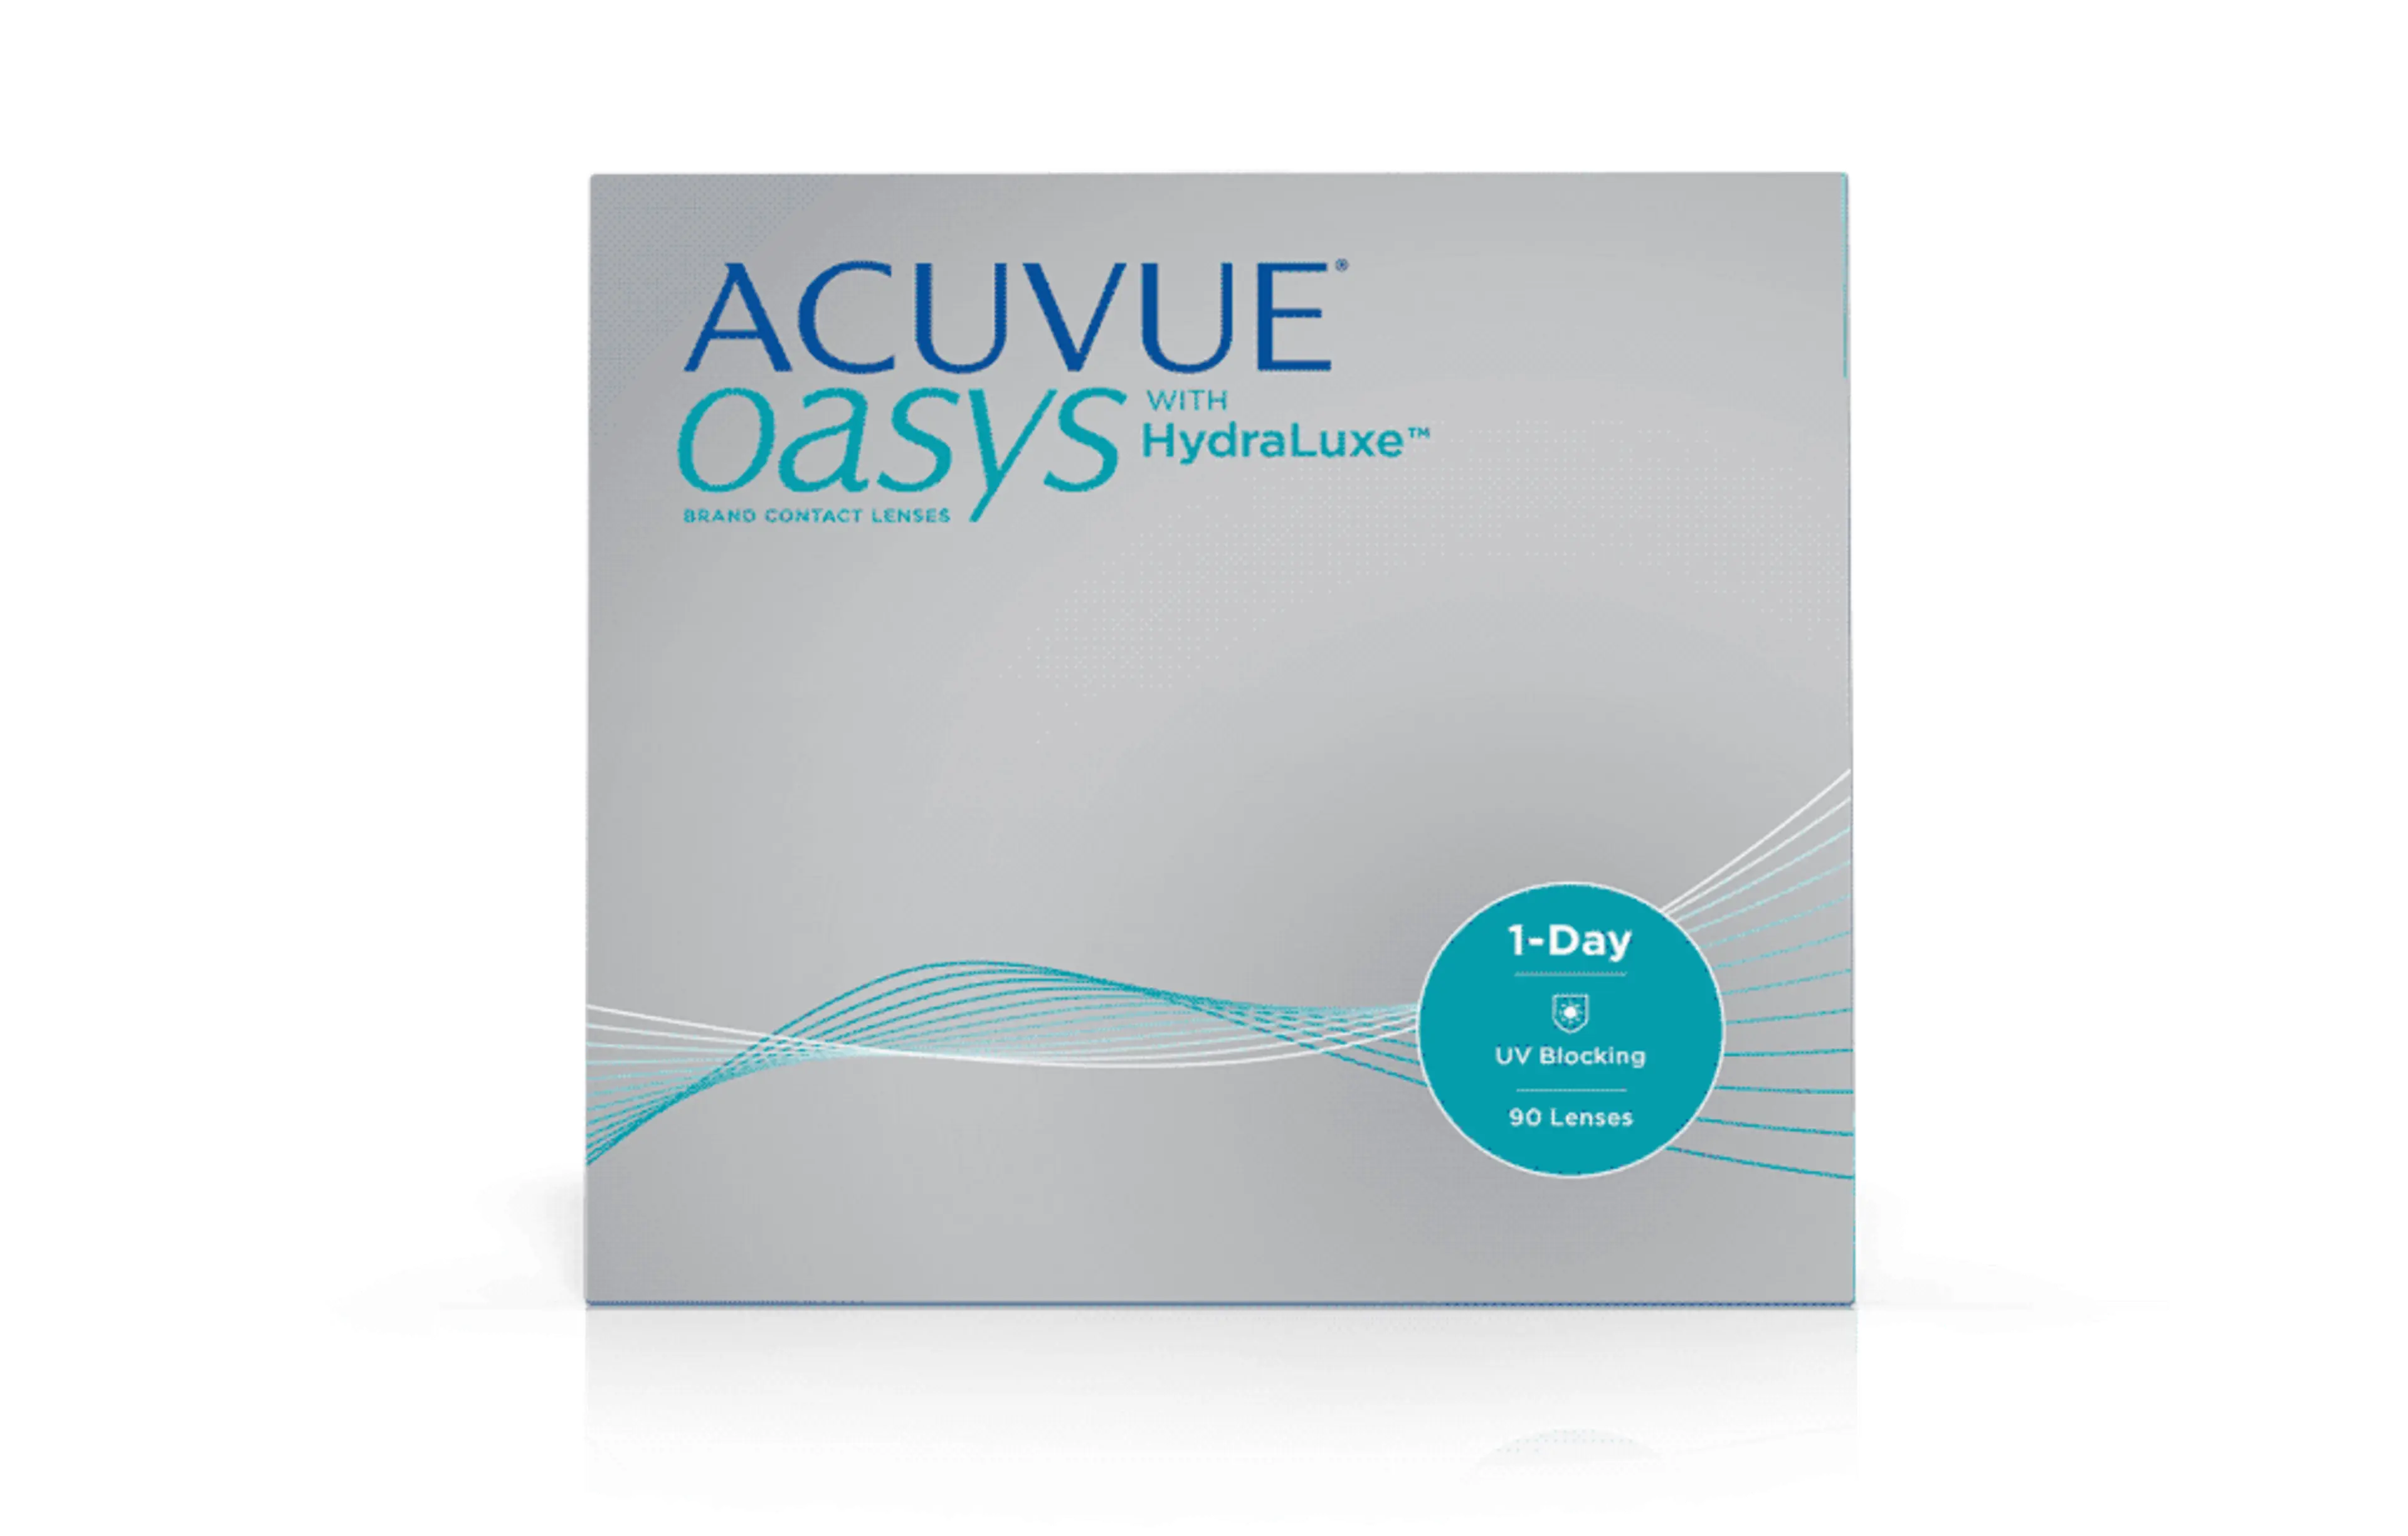 Acuvue Oasys 1-Day 30-pack